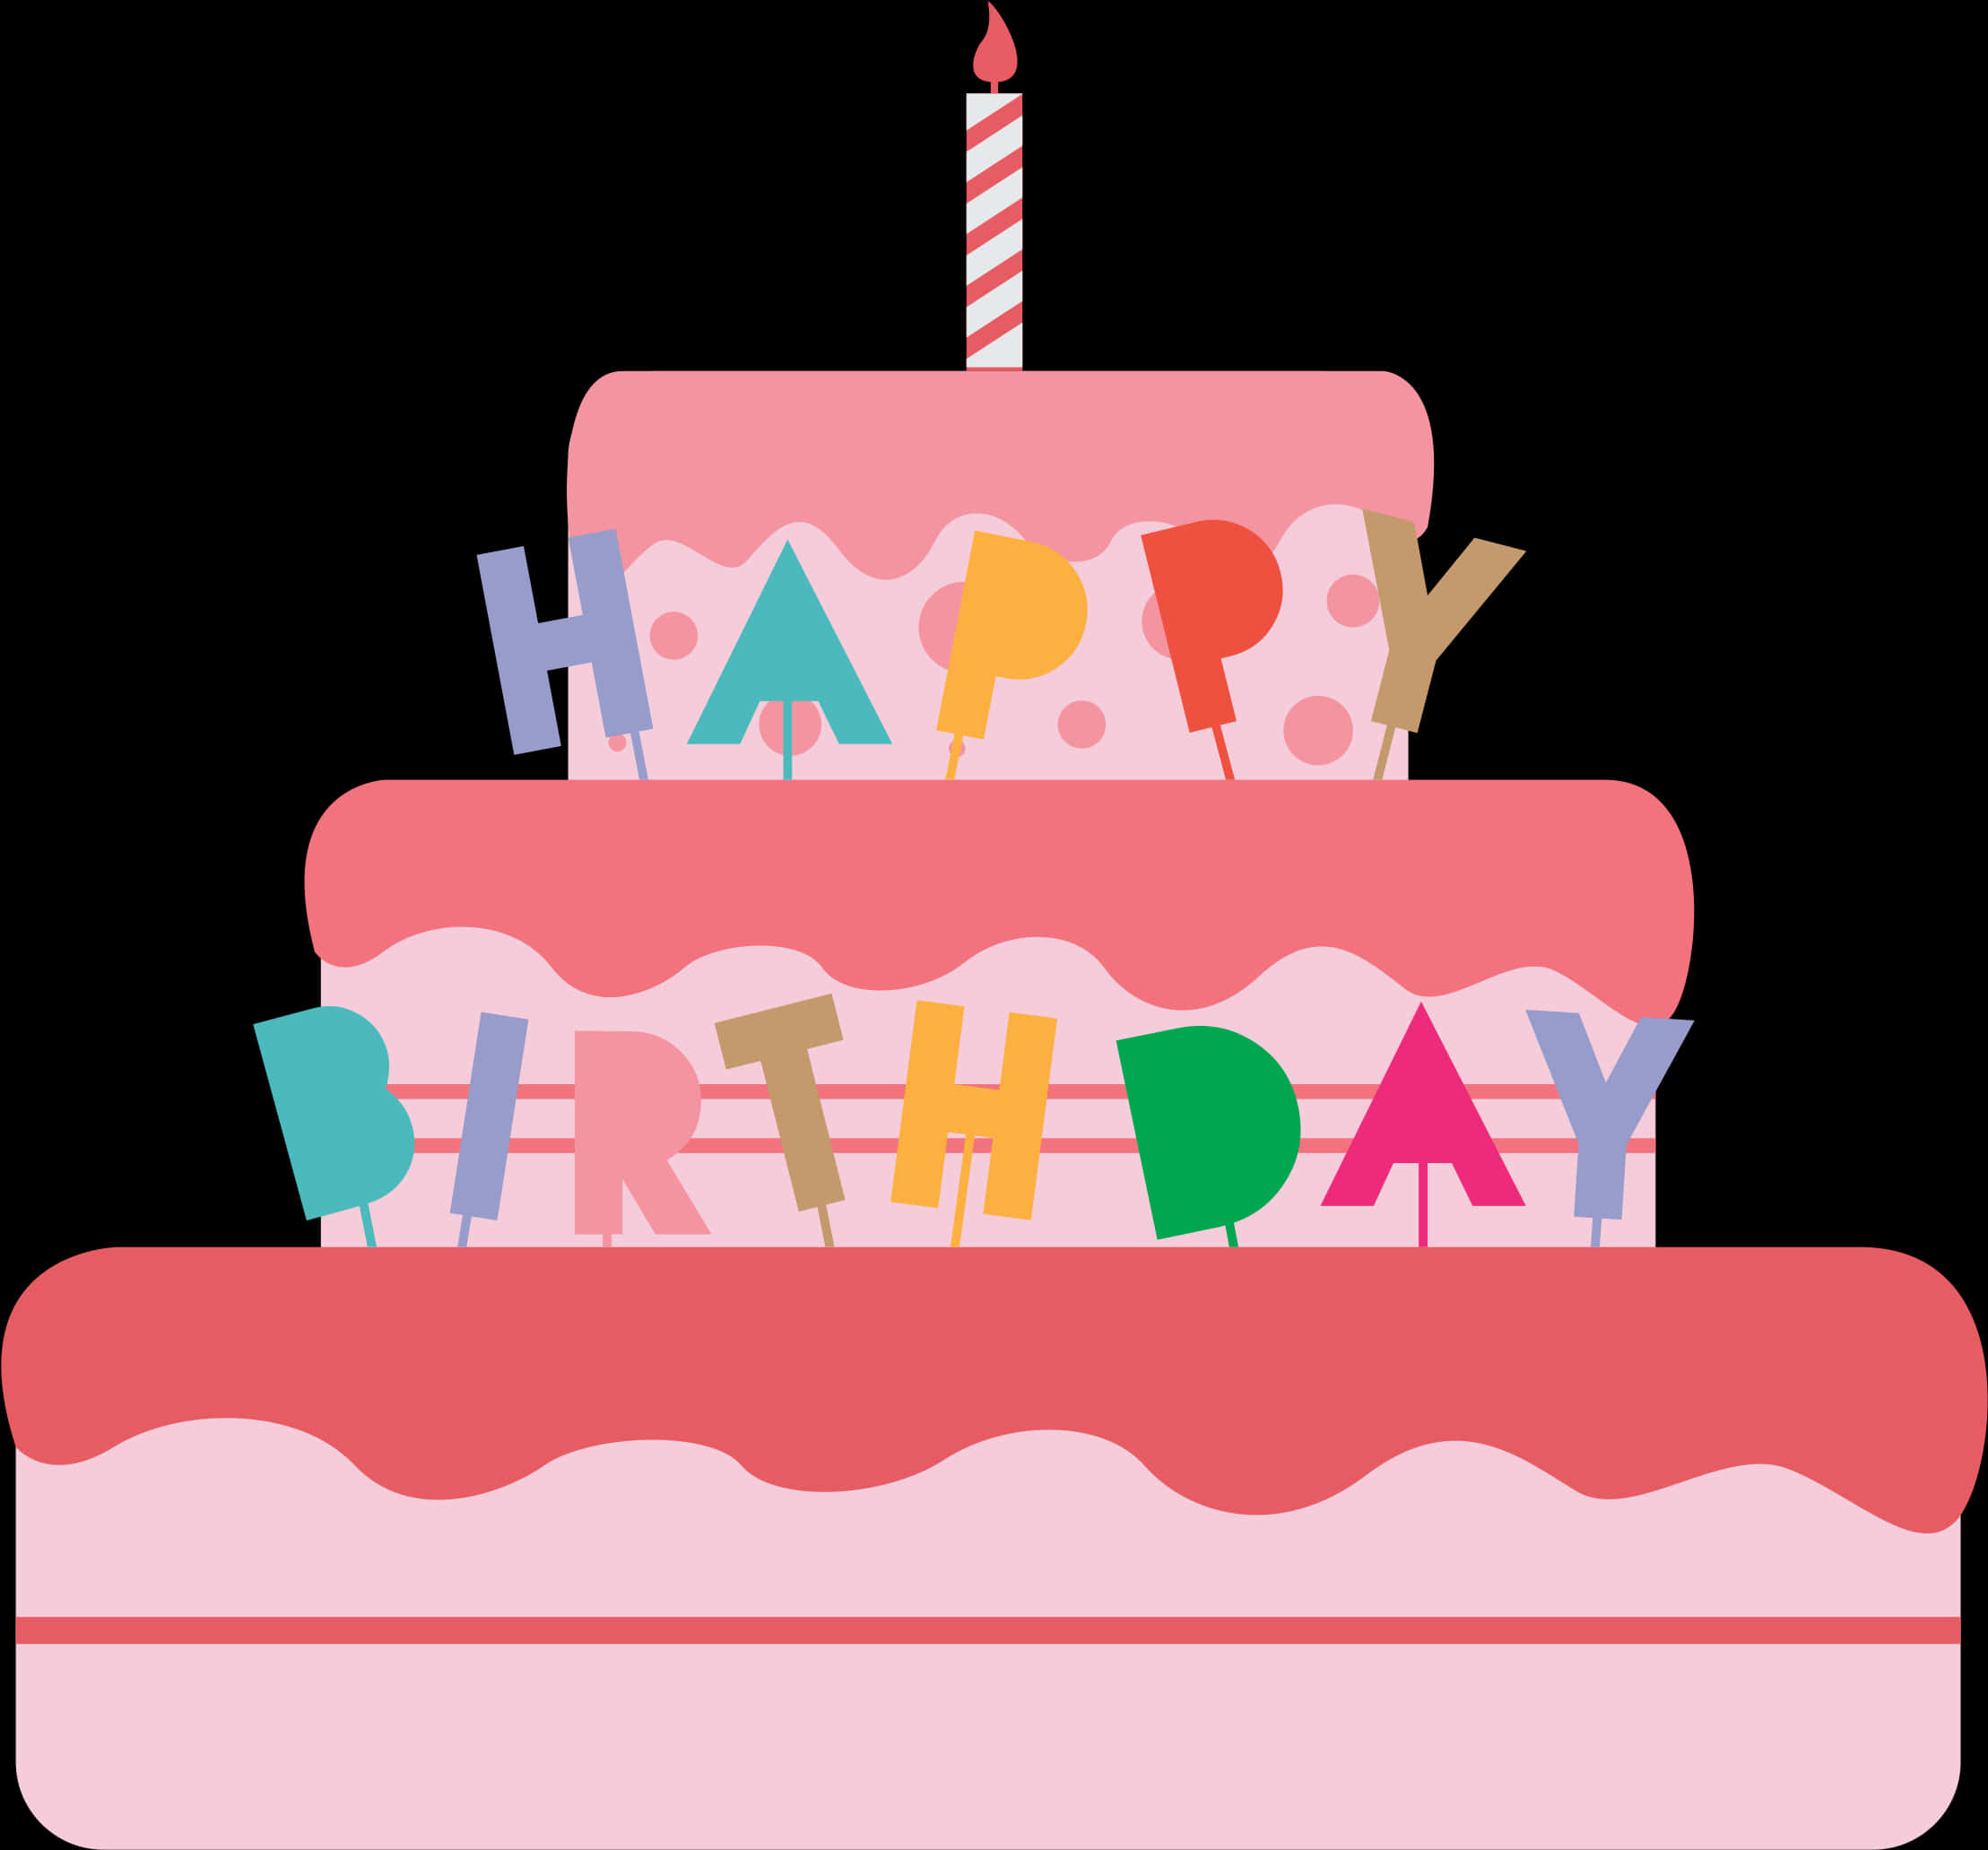 Colorful Happy Birthday Cake Illustration PNG image